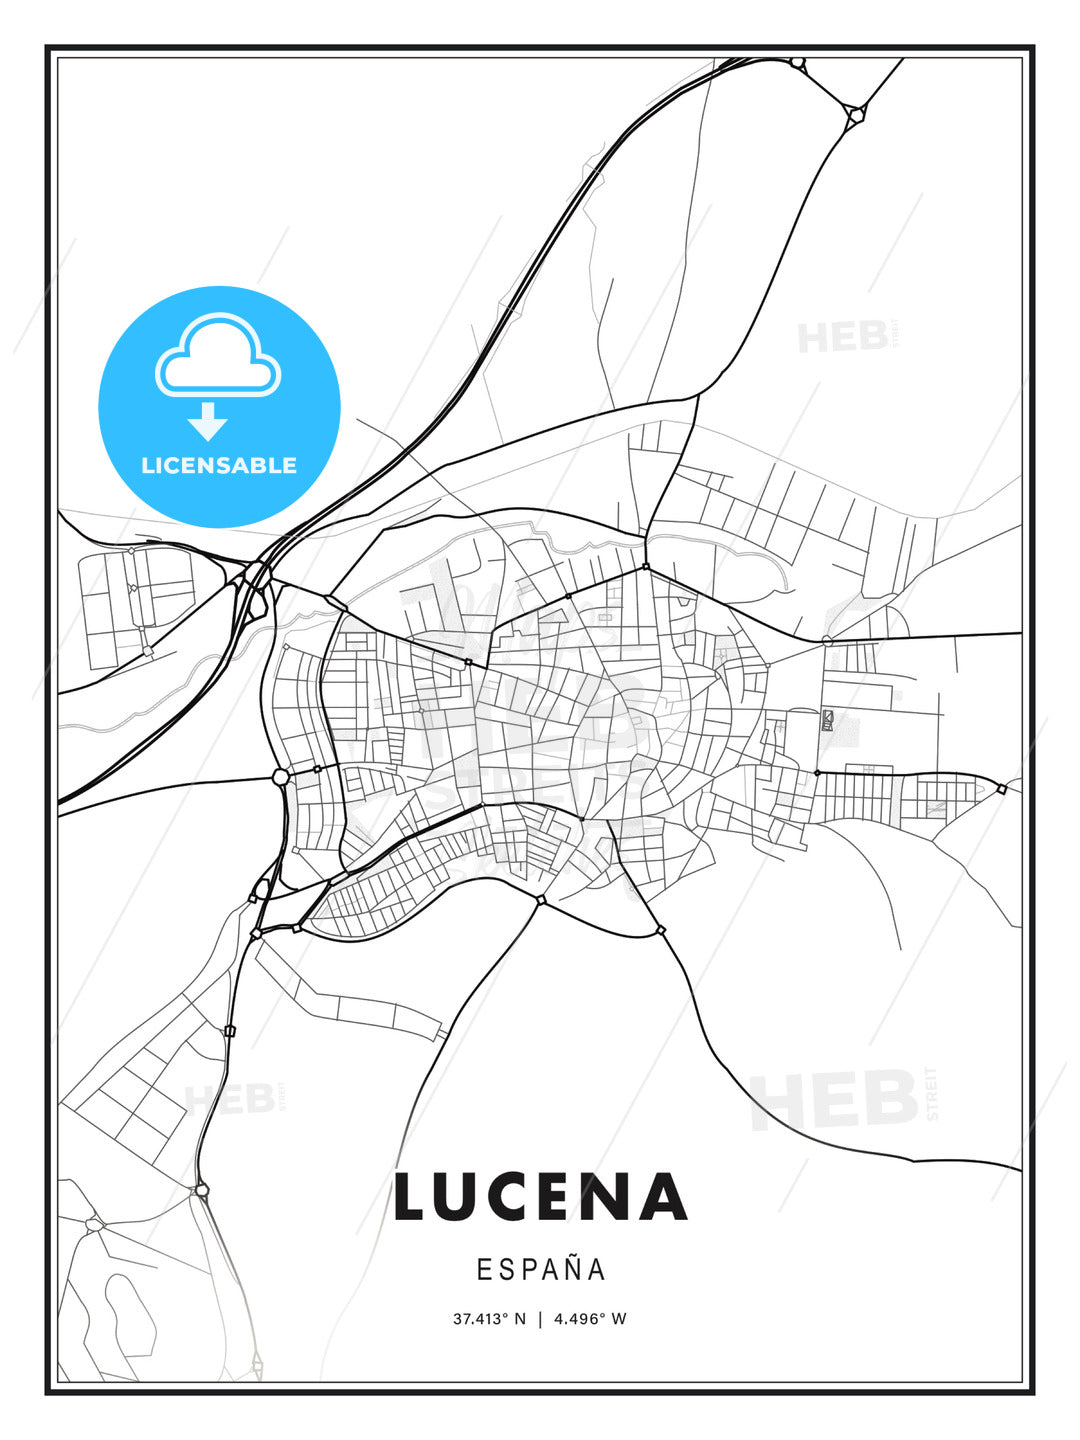 Lucena, Spain, Modern Print Template in Various Formats - HEBSTREITS Sketches